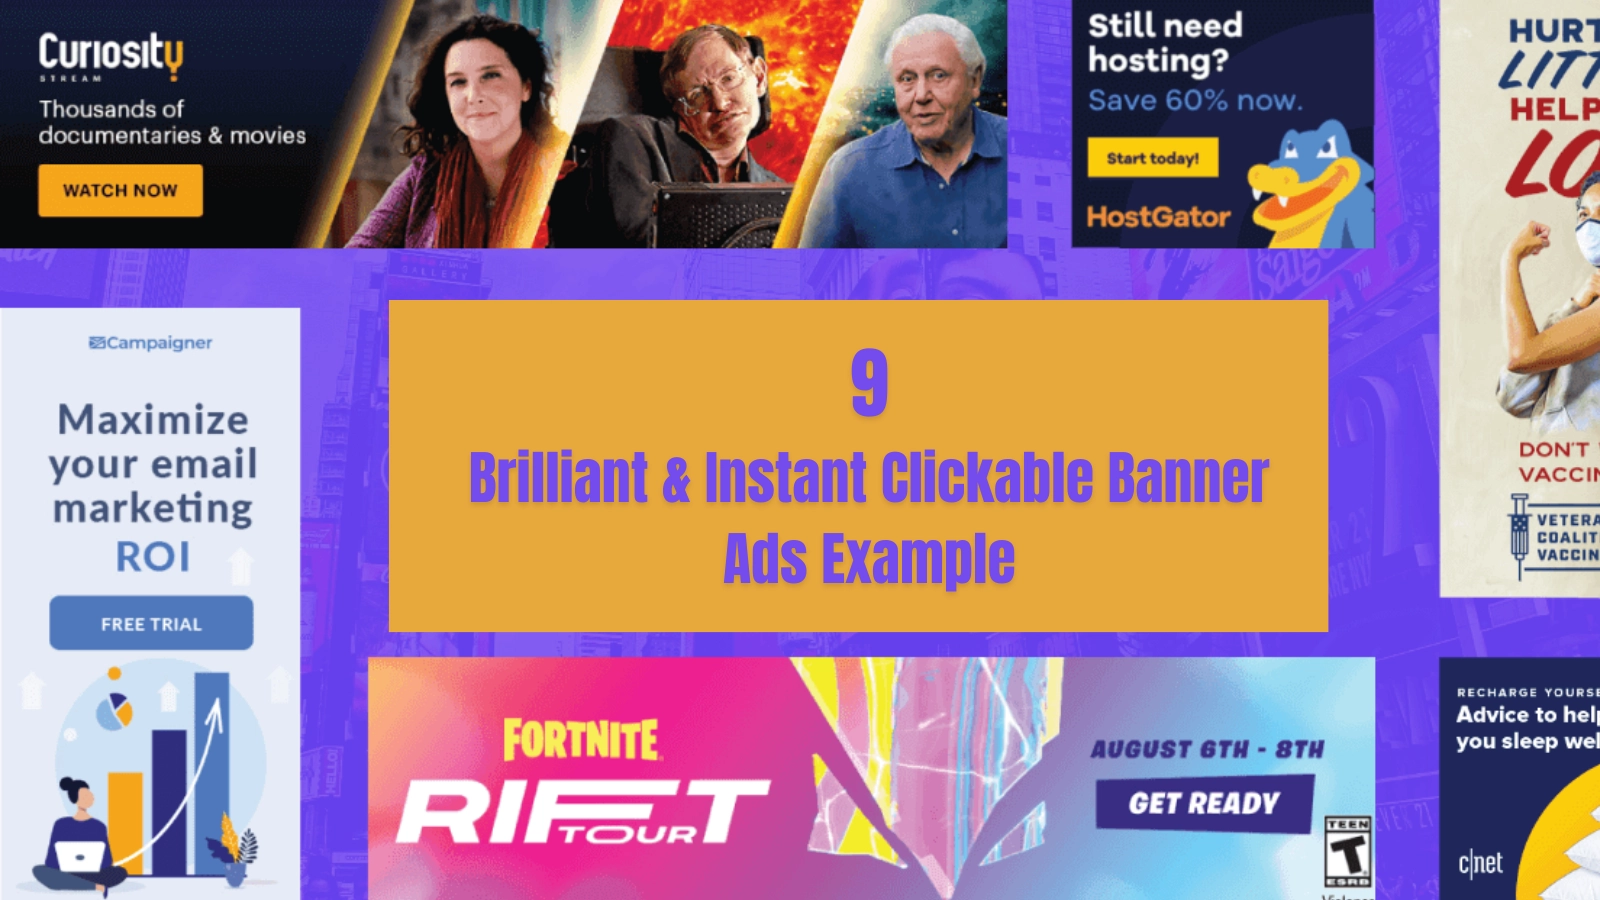 9-Brilliant-Instant-Clickable-Banner-Ads-Example